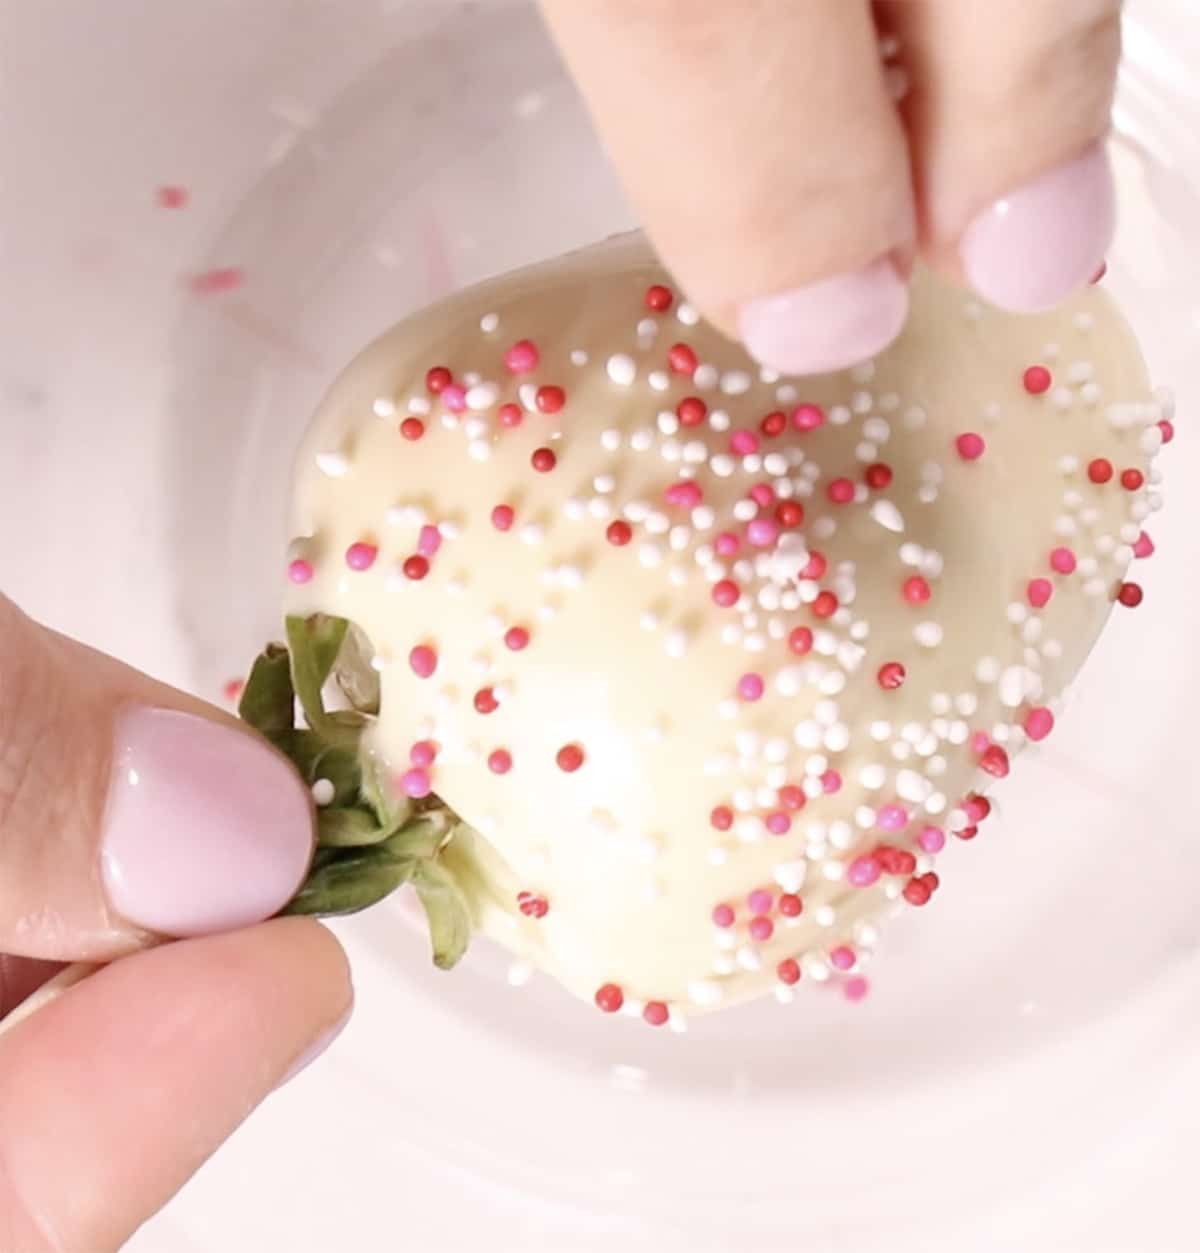 hands adding sprinkles to white chocolate covered strawberries shot from above